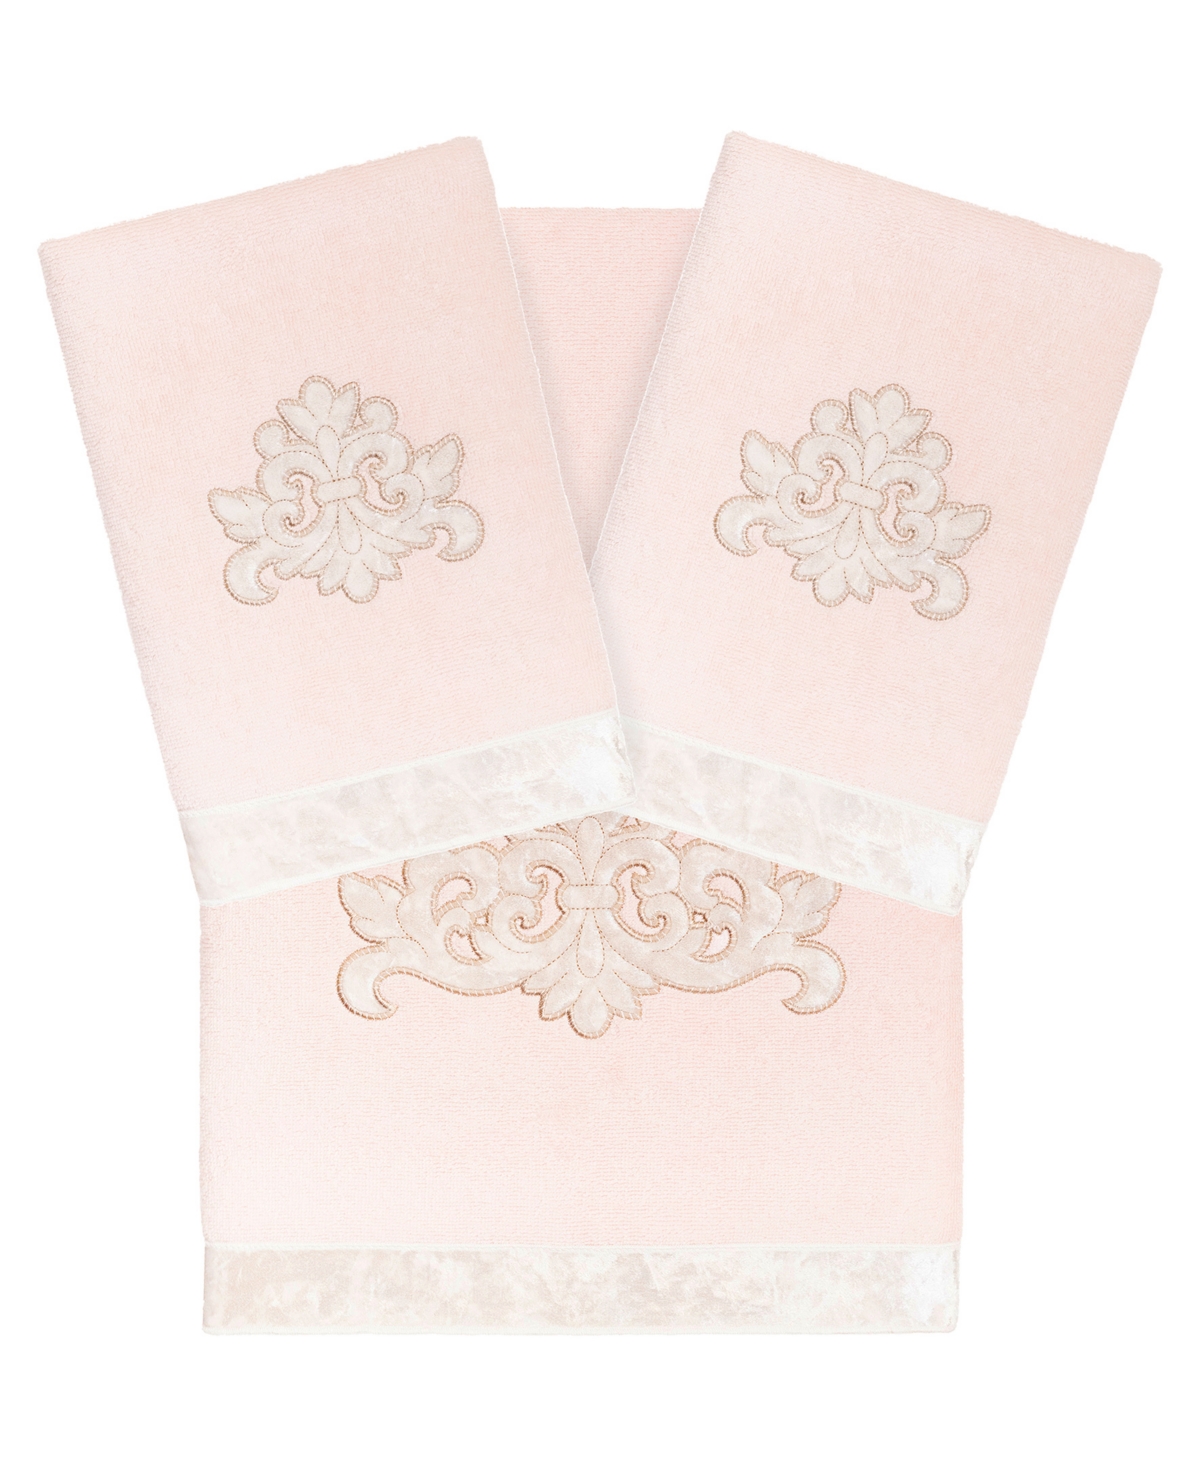 Linum Home Textiles Turkish Cotton May Embellished Towel Set, 3 Piece In Blush